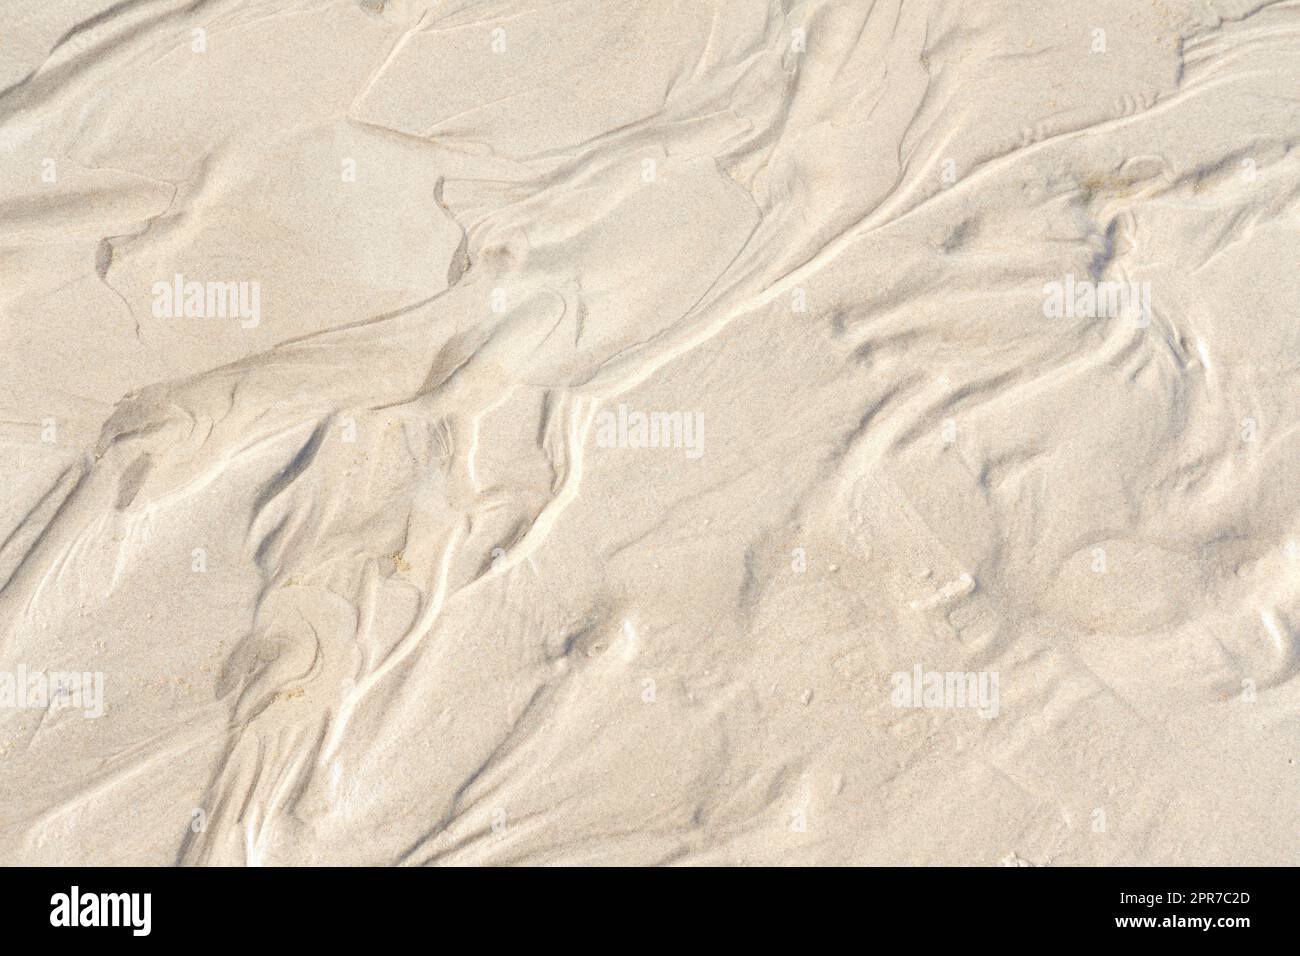 Abstract white sand sediment pattern, seaside natural organic landscape shining in the sun. Top view of a conceptual textured image of moist sea sand formed at the sea shore on a summer vacation. Stock Photo